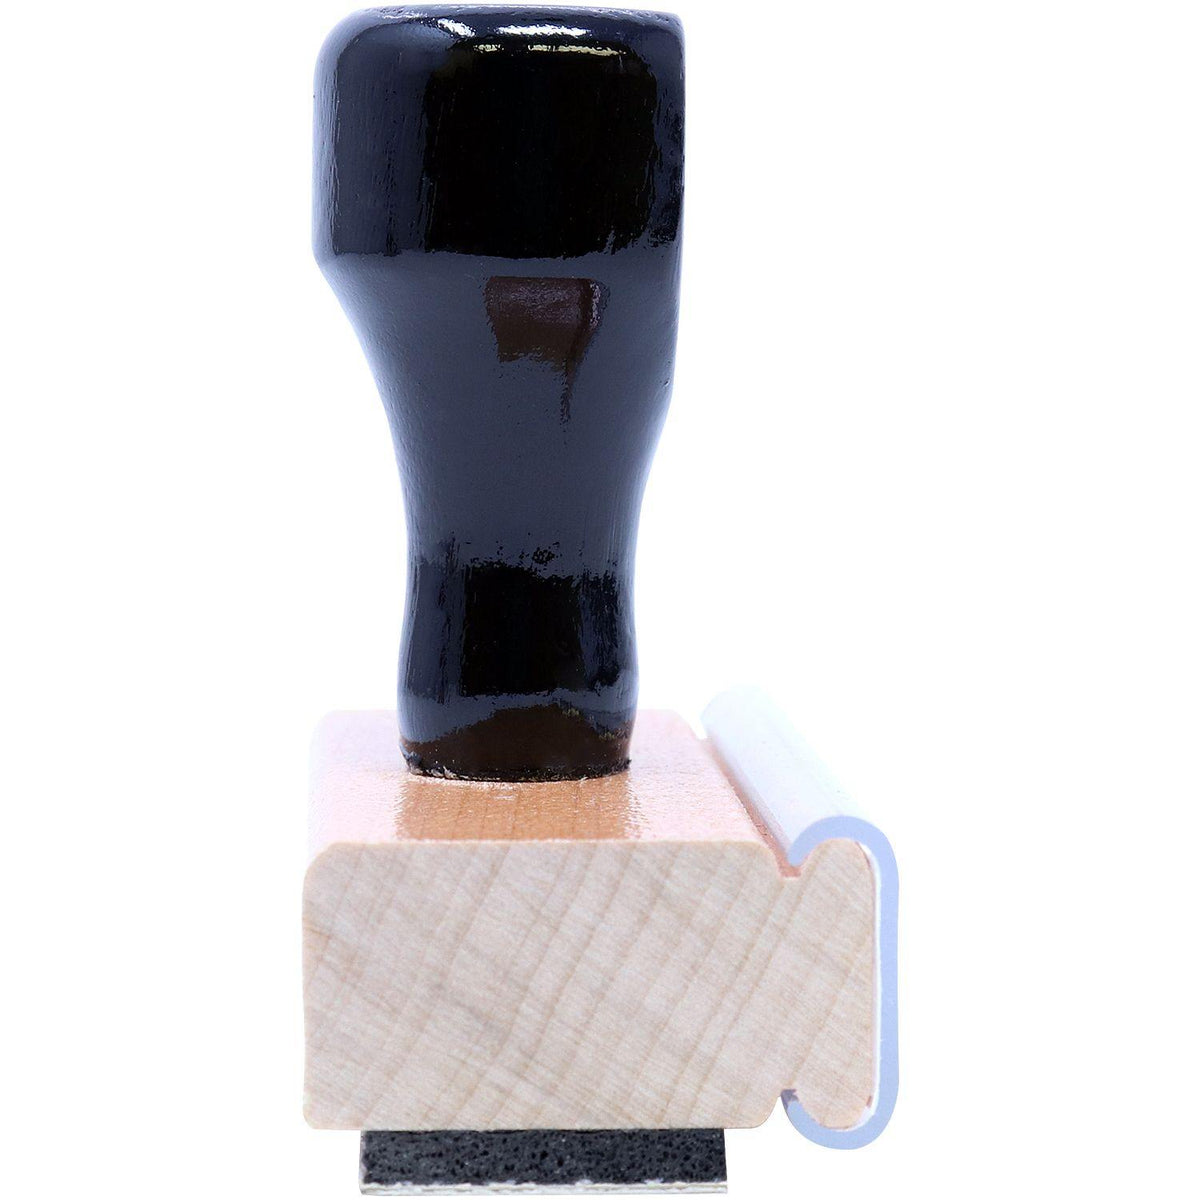 Side View of Large Appraisal Rubber Stamp